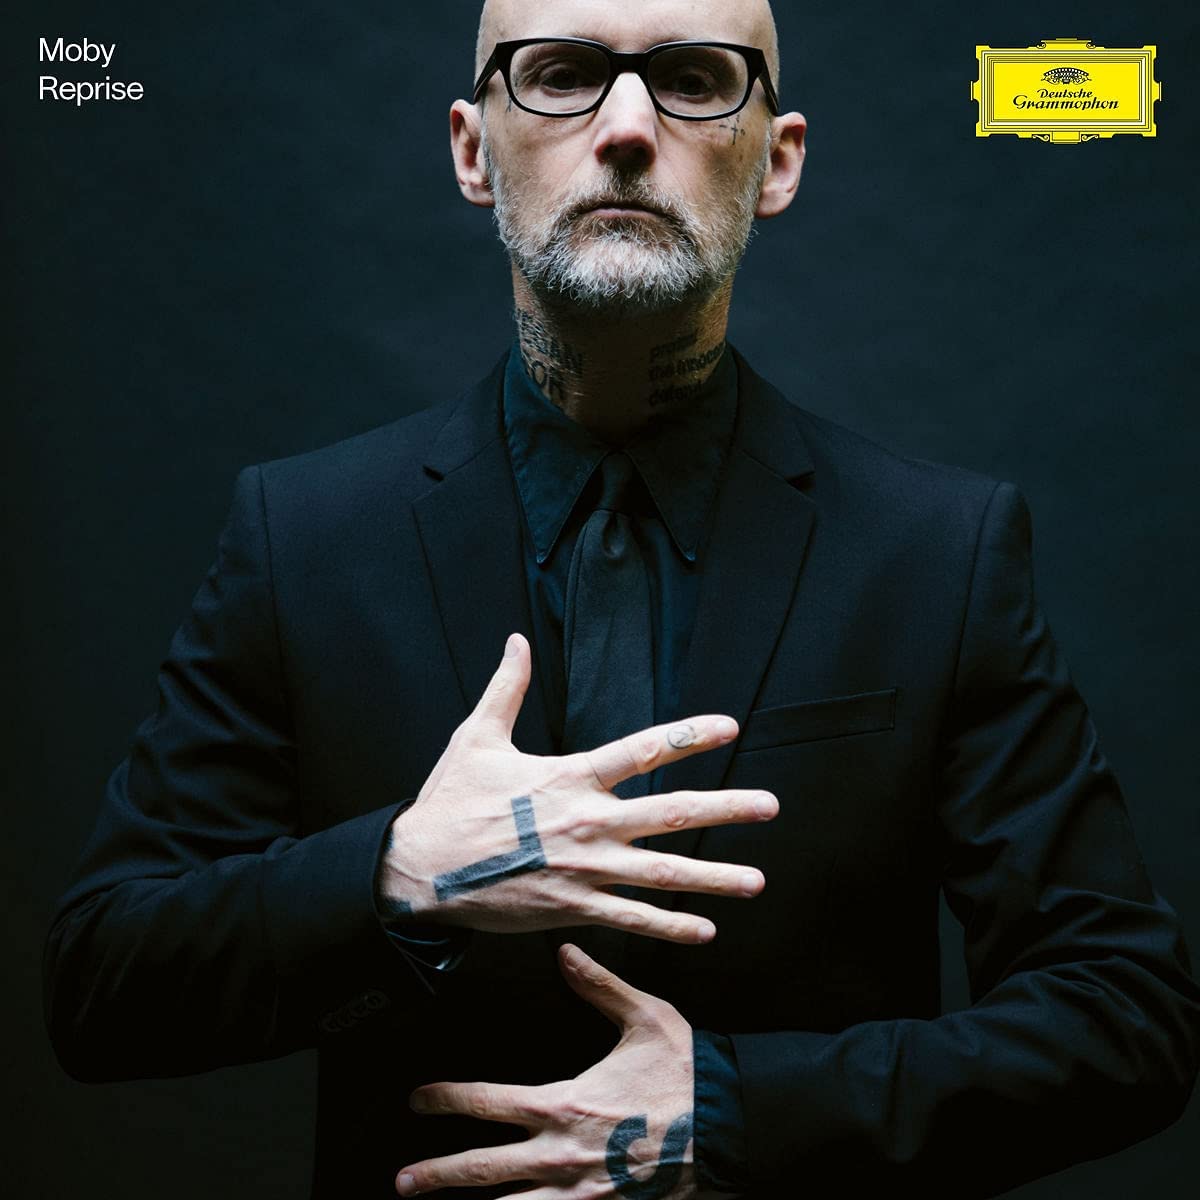 Reprise on Vinyl sees Moby revisiting and reimagining musical highlights from his 30-year career. Together with the Budapest Art Orchestra, he has re-envisioned some of his most recognizable rave classics and anthems